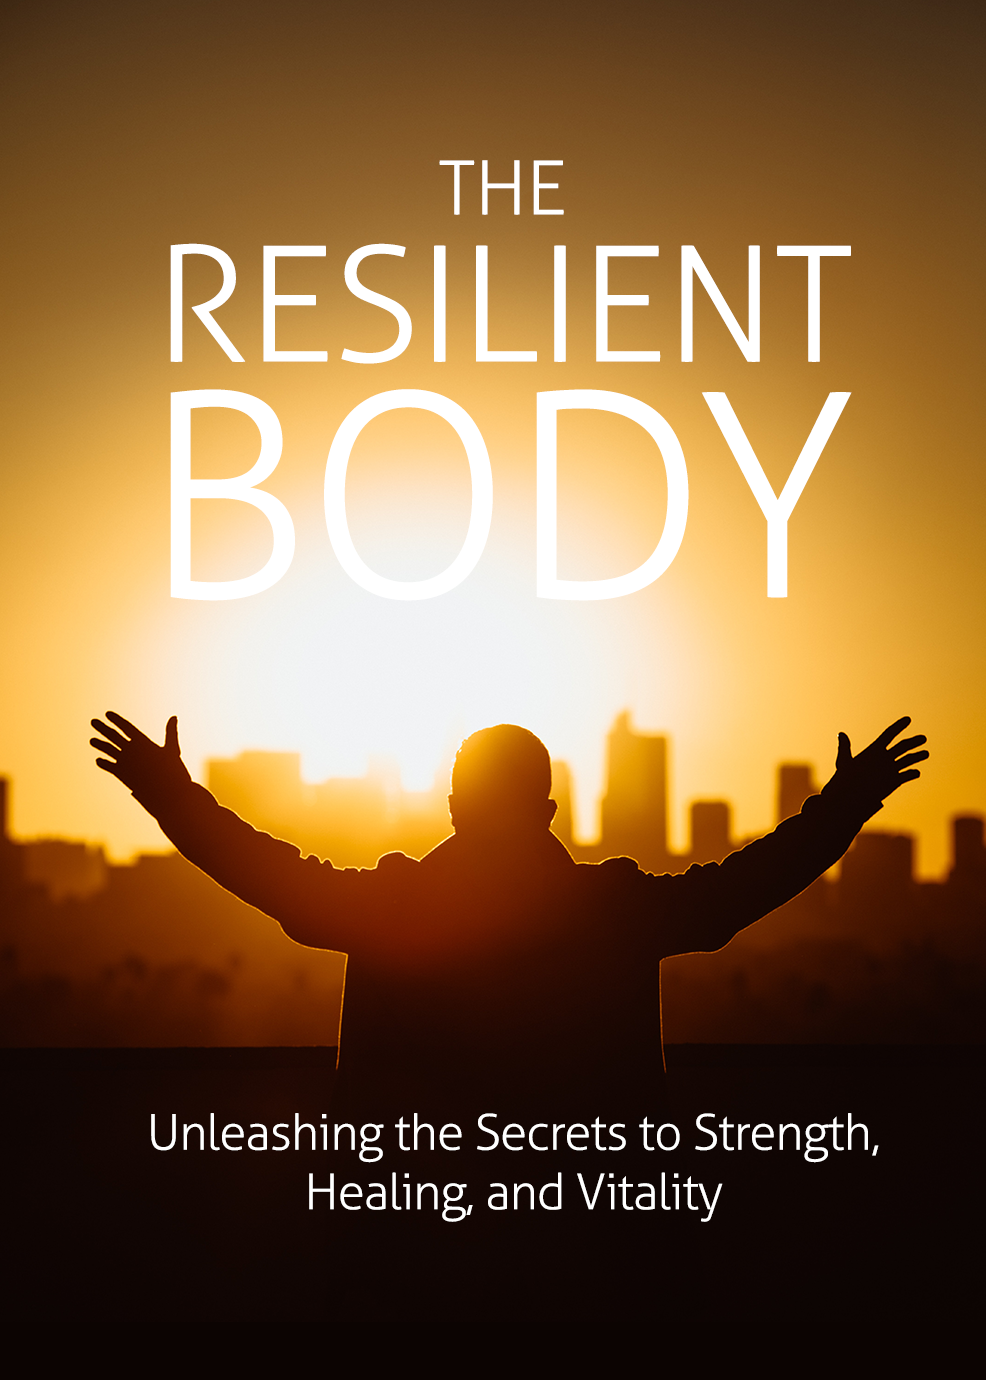 NEW! License - The Resilient Body